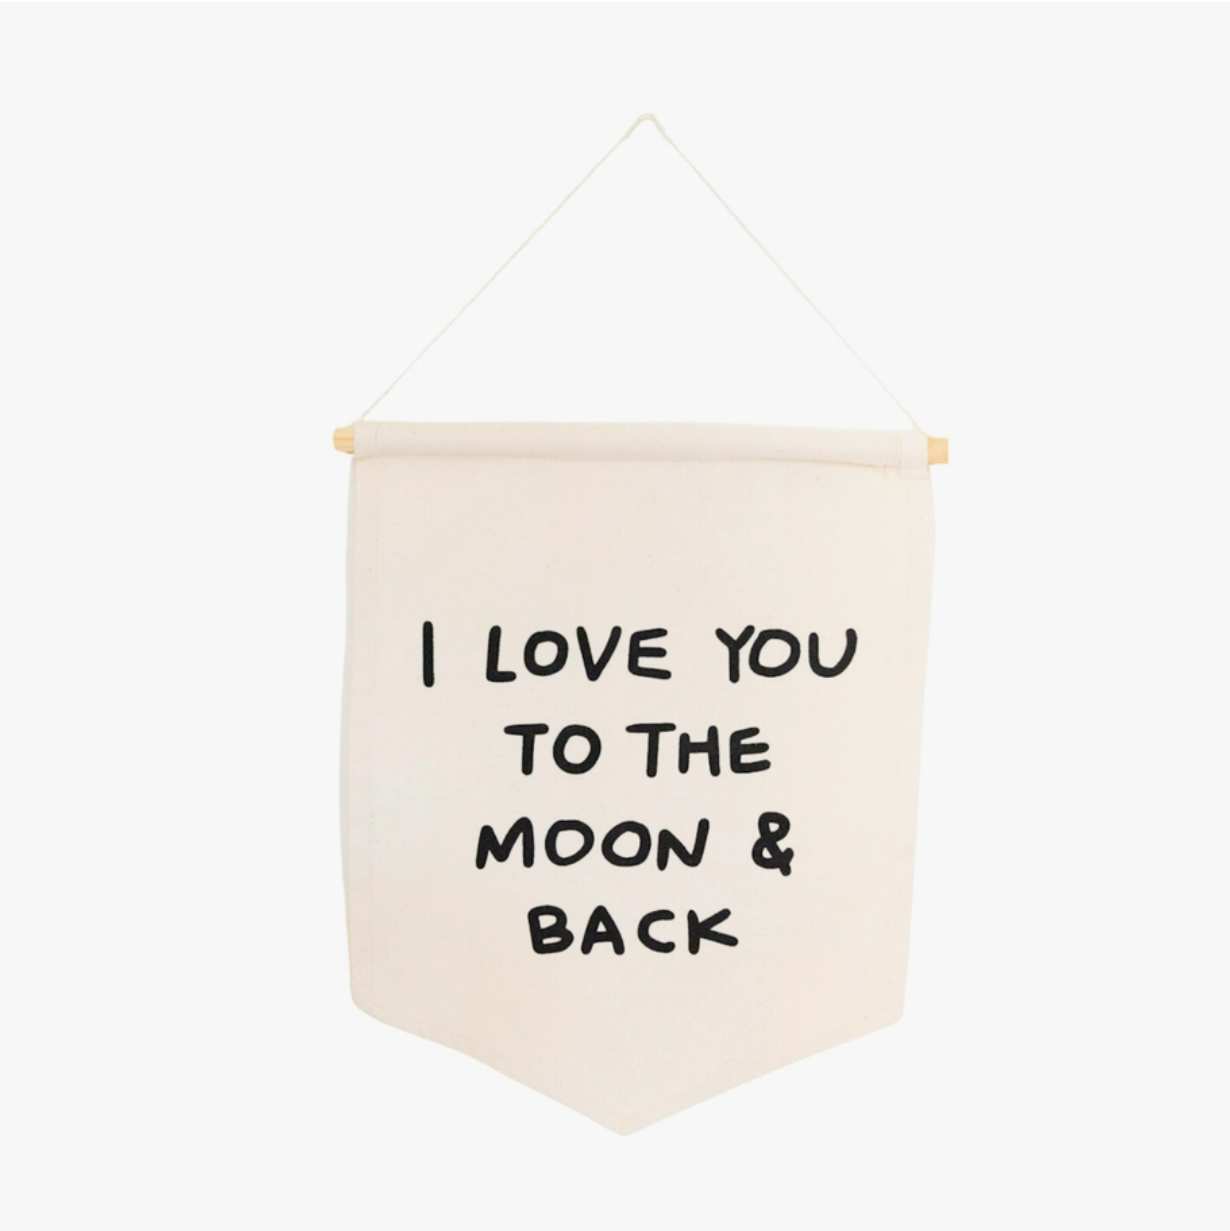 Imani Collective Décor "I love you to the moon and back" Hang Sign by Imani Collective  "Give Thanks" Organic Canvas Hang Sign | Fall/Autumn Decor for Kids